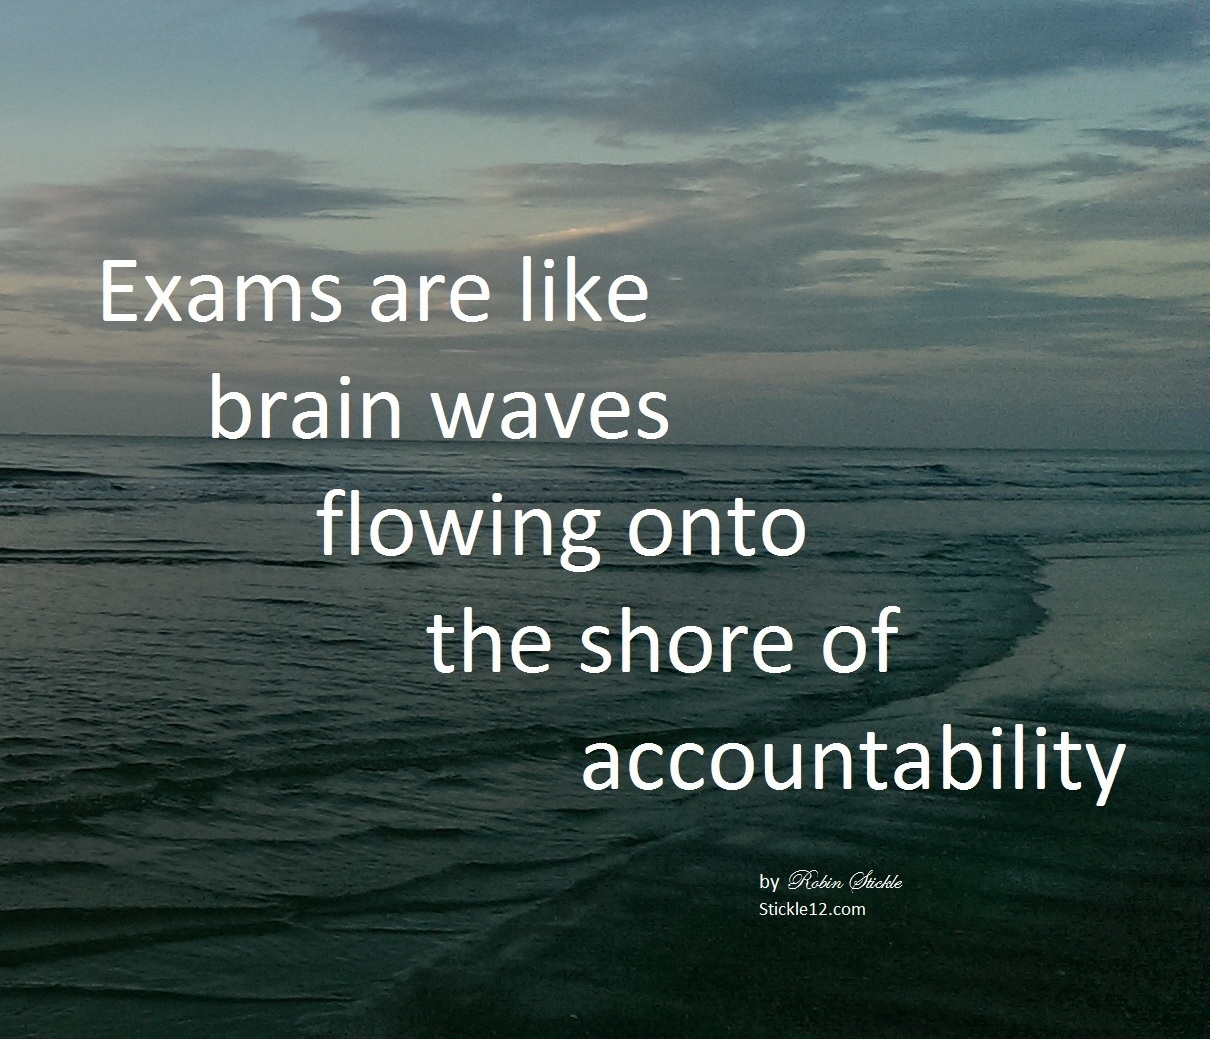 Meme with a picture of ocean waves coming into shore. Words say "Exams are like brain waves flowing onto the shore of accountability" signed "by Robin Stickle Stickle12.com"